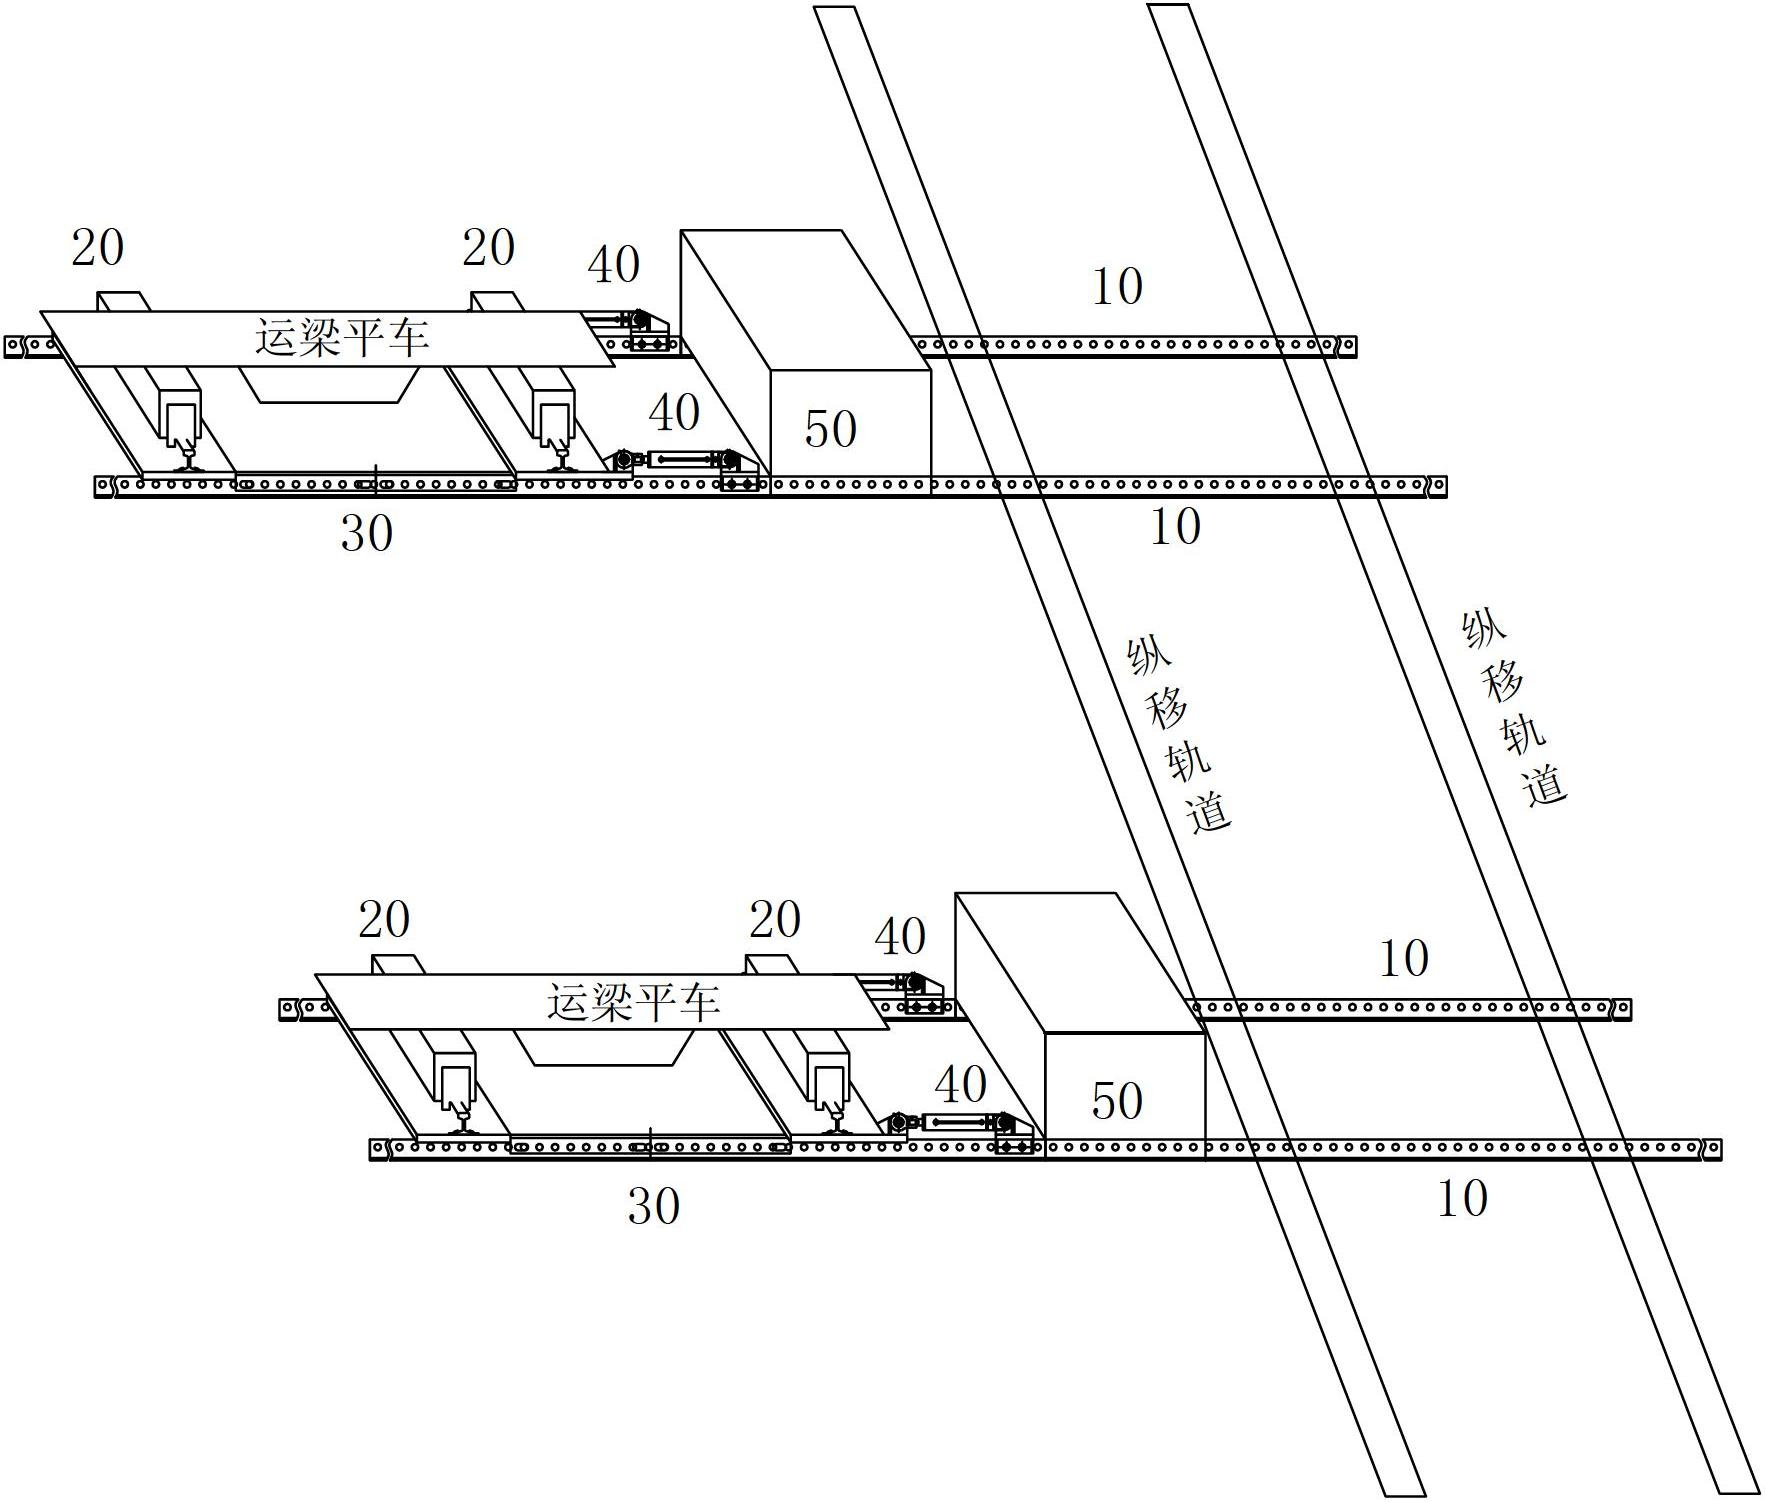 Slipping slot type cross transfer device and method for assisting hoisting of large-size box girder